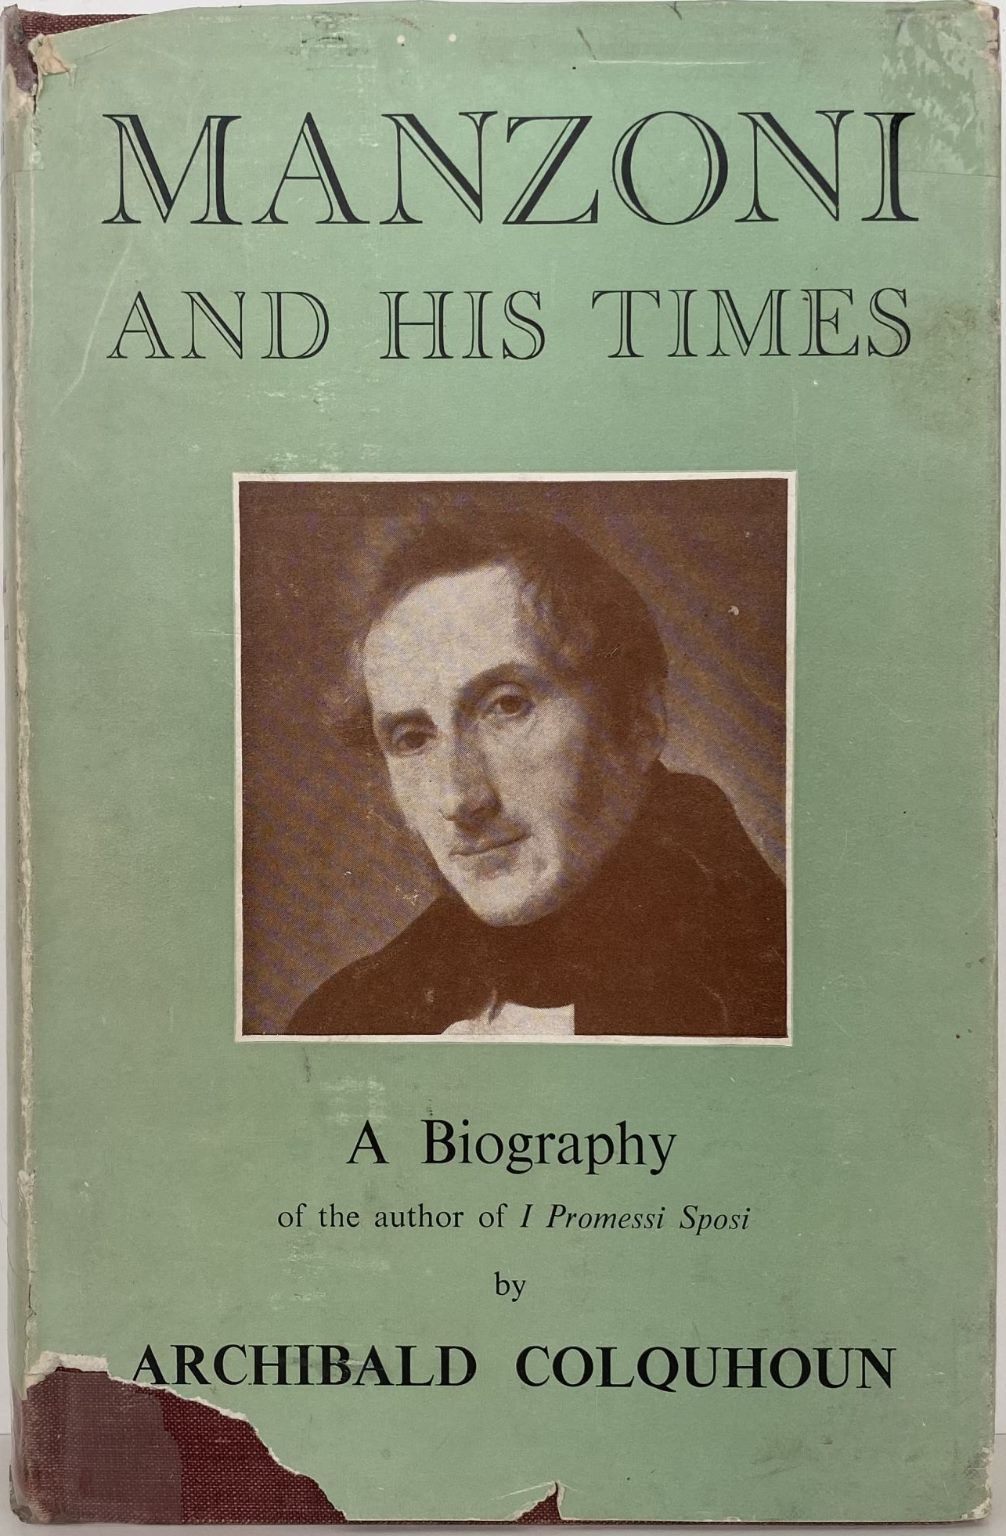 MANZONI AND HIS TIMES: A Biography